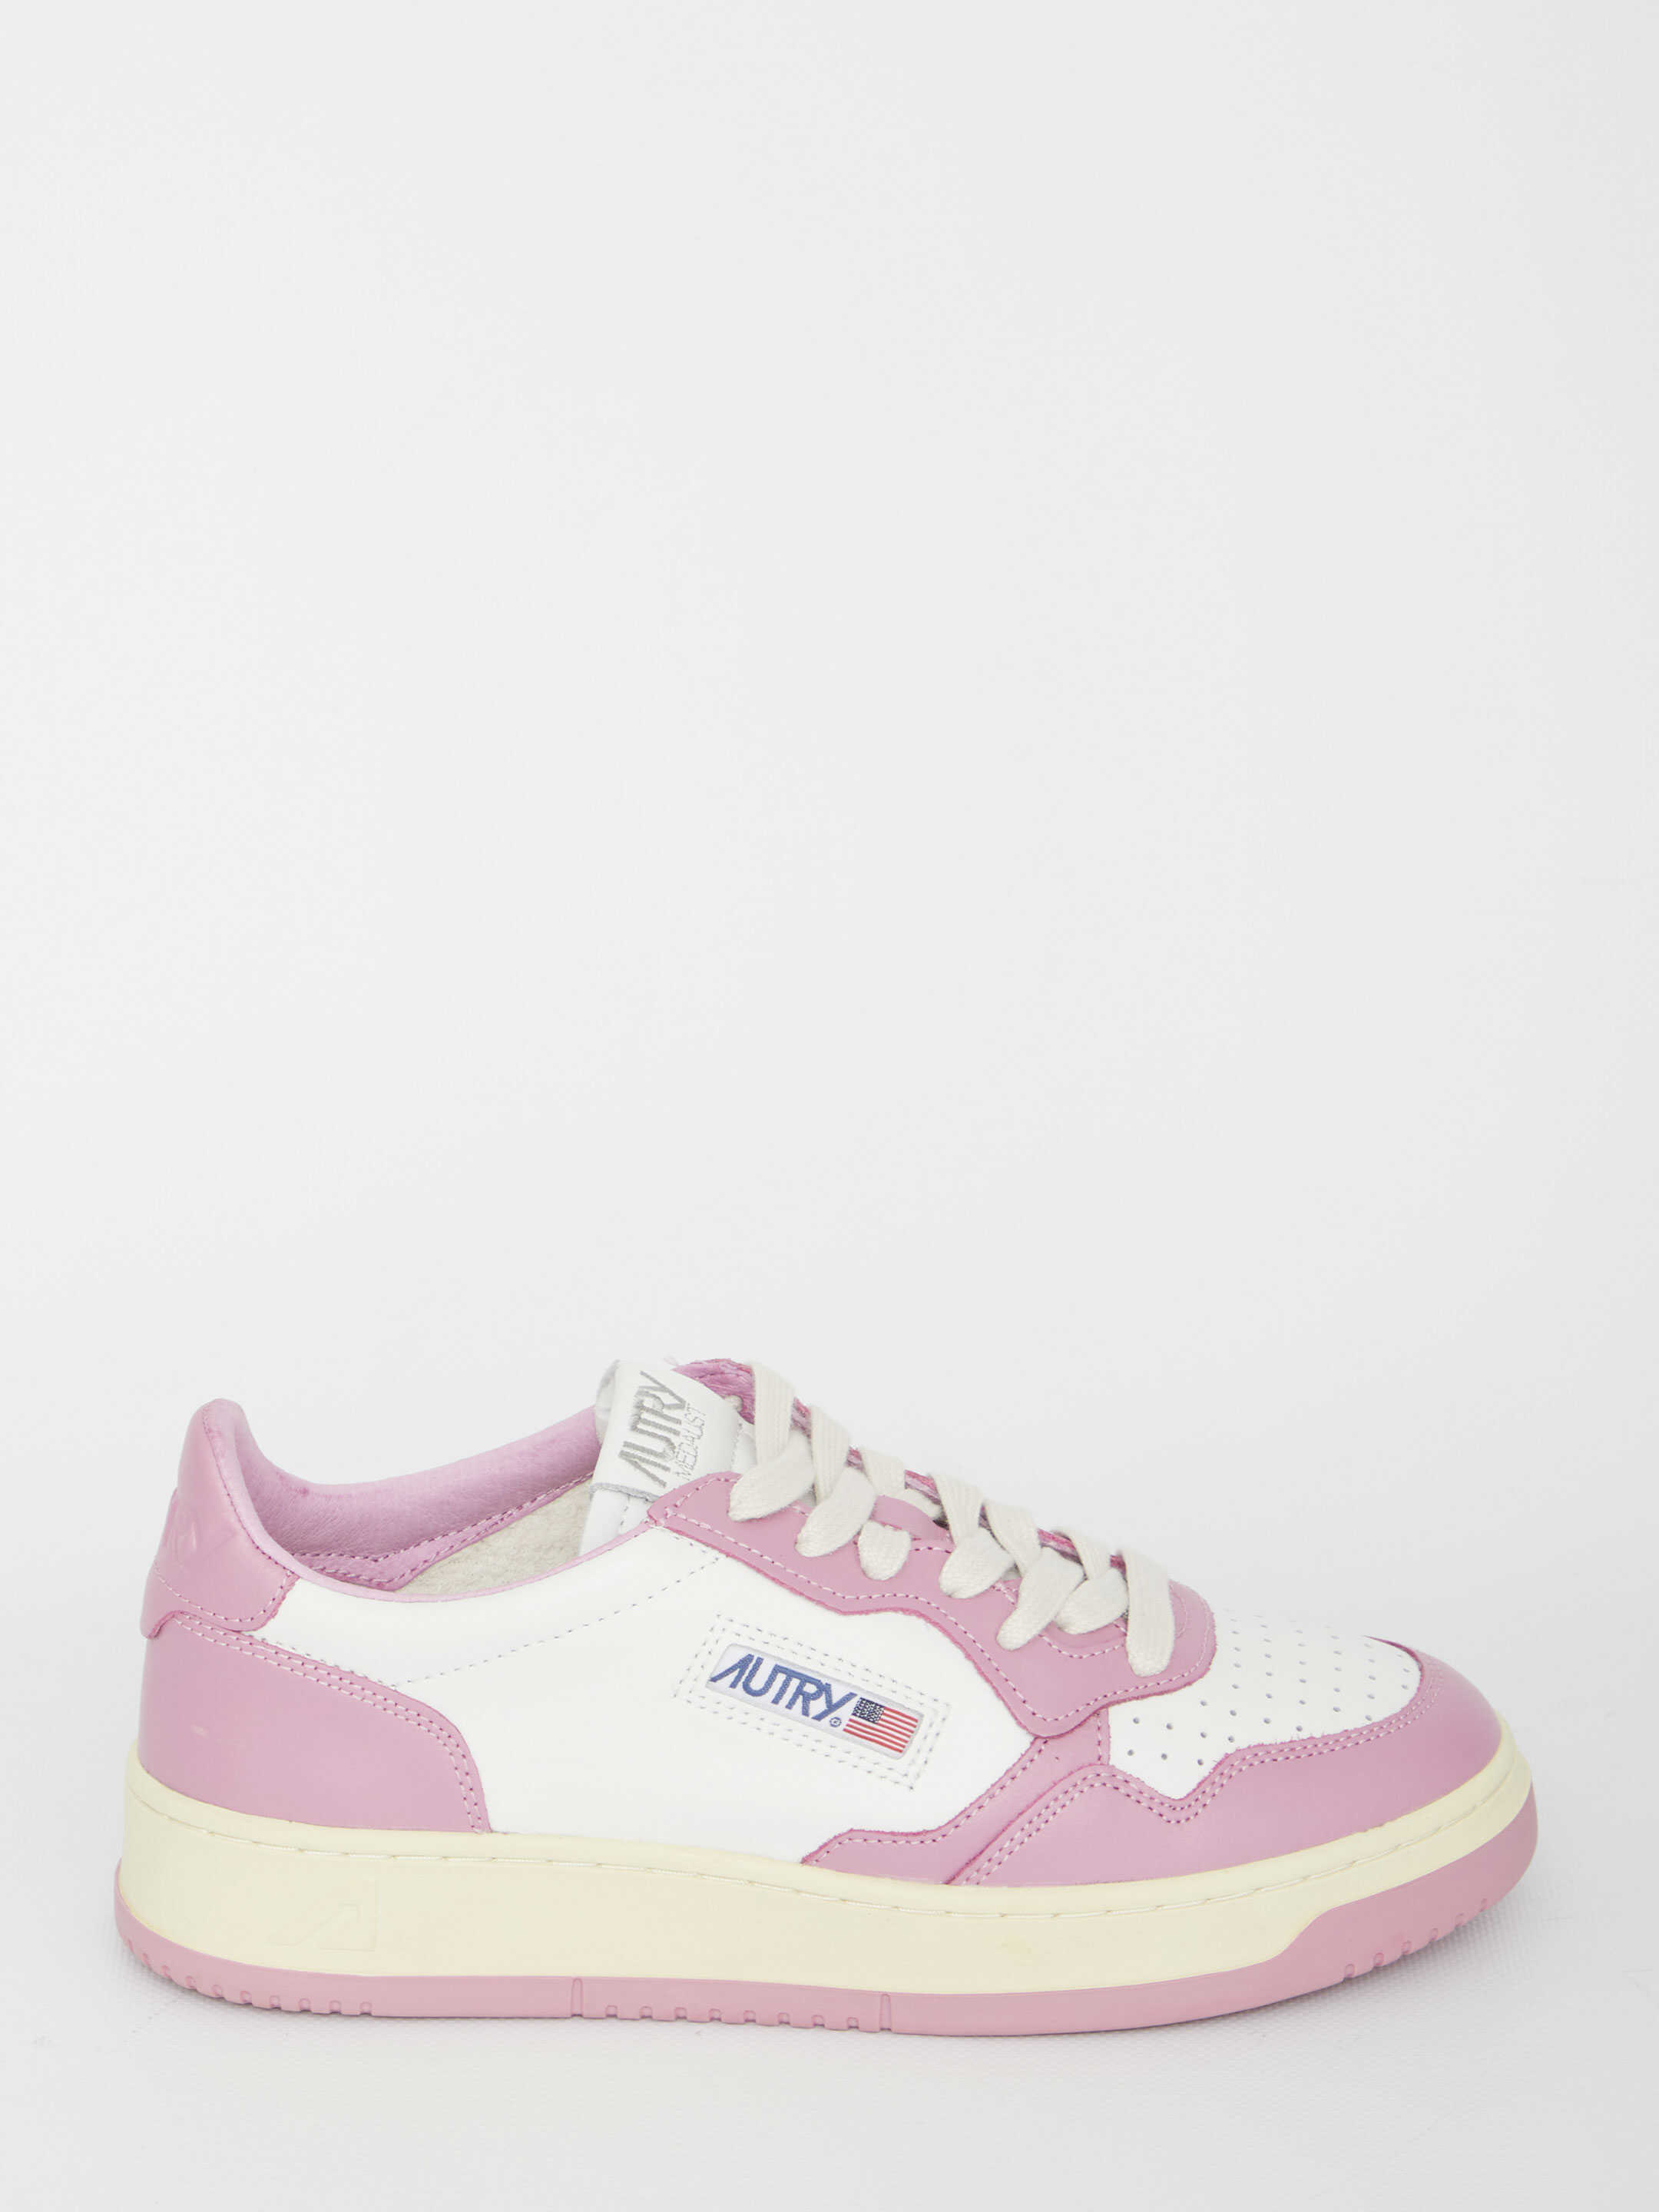 AUTRY Medialist Pink And Sneakers WHITE